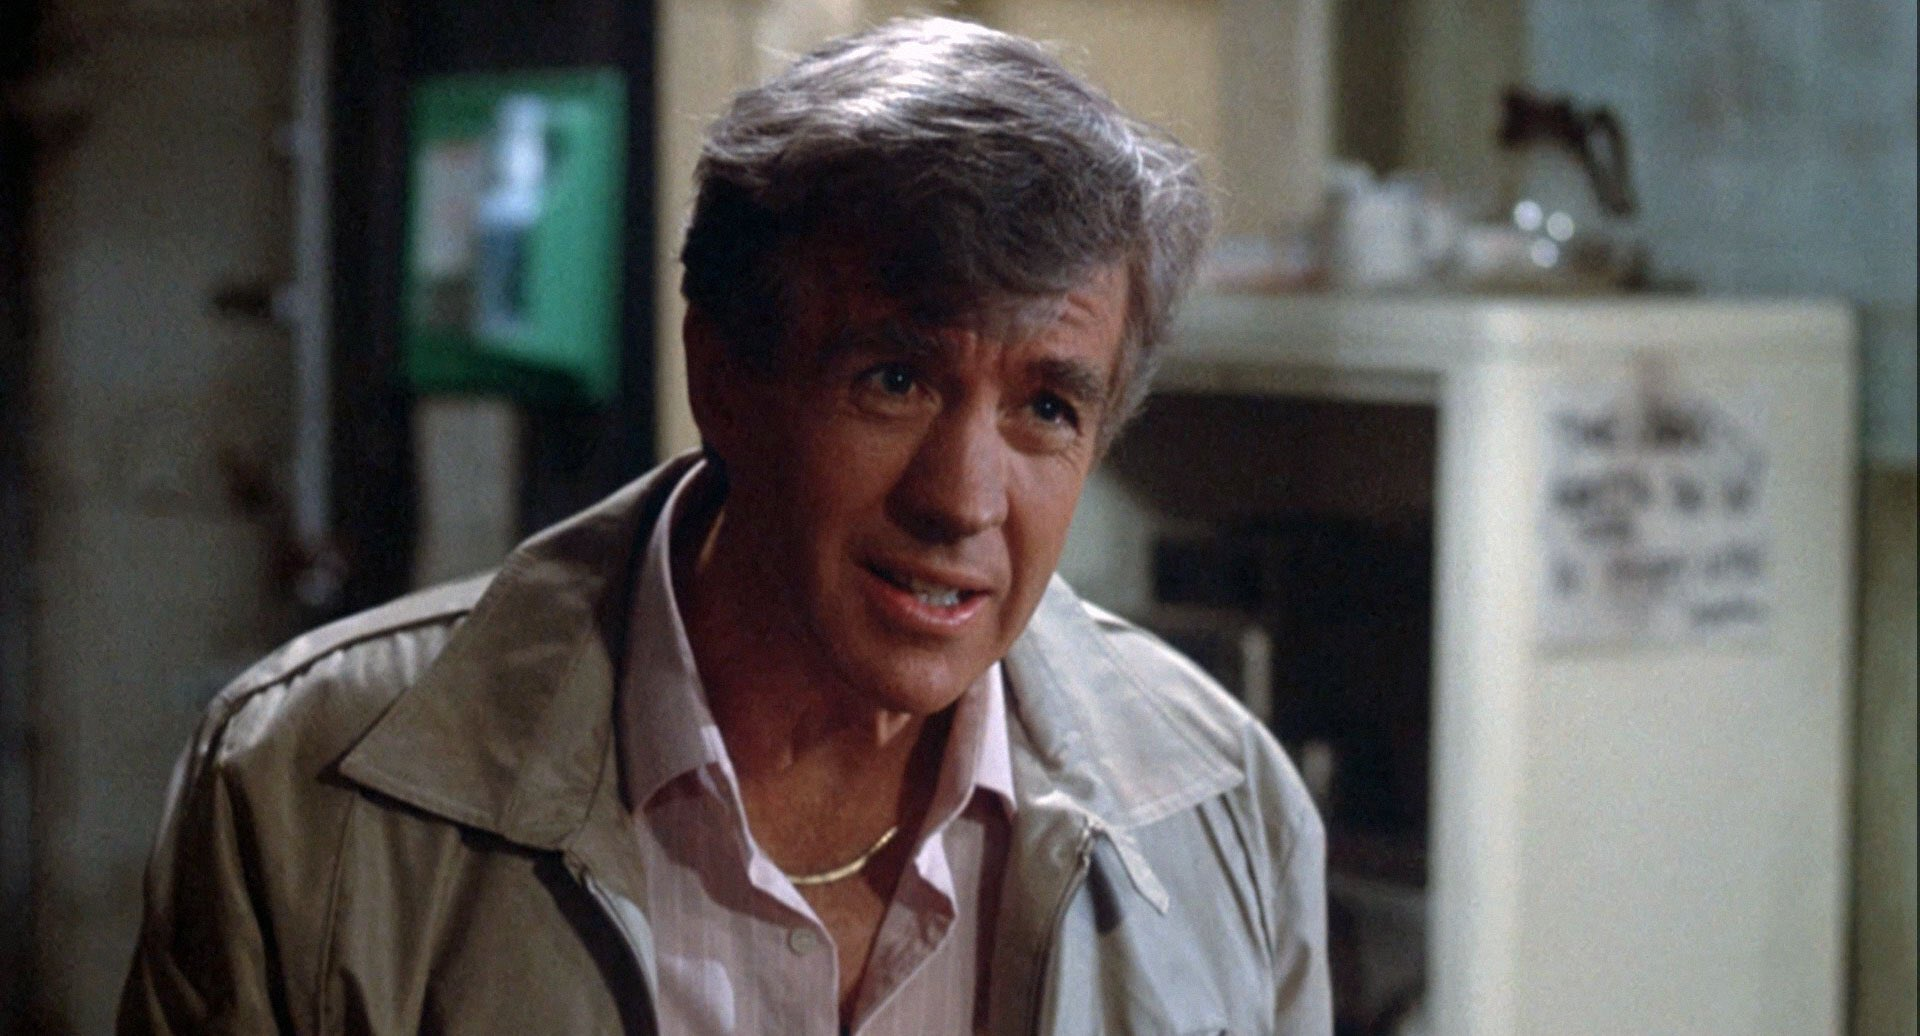 'The Return of the Living Dead' Star Clu Gulager Has Passed Away